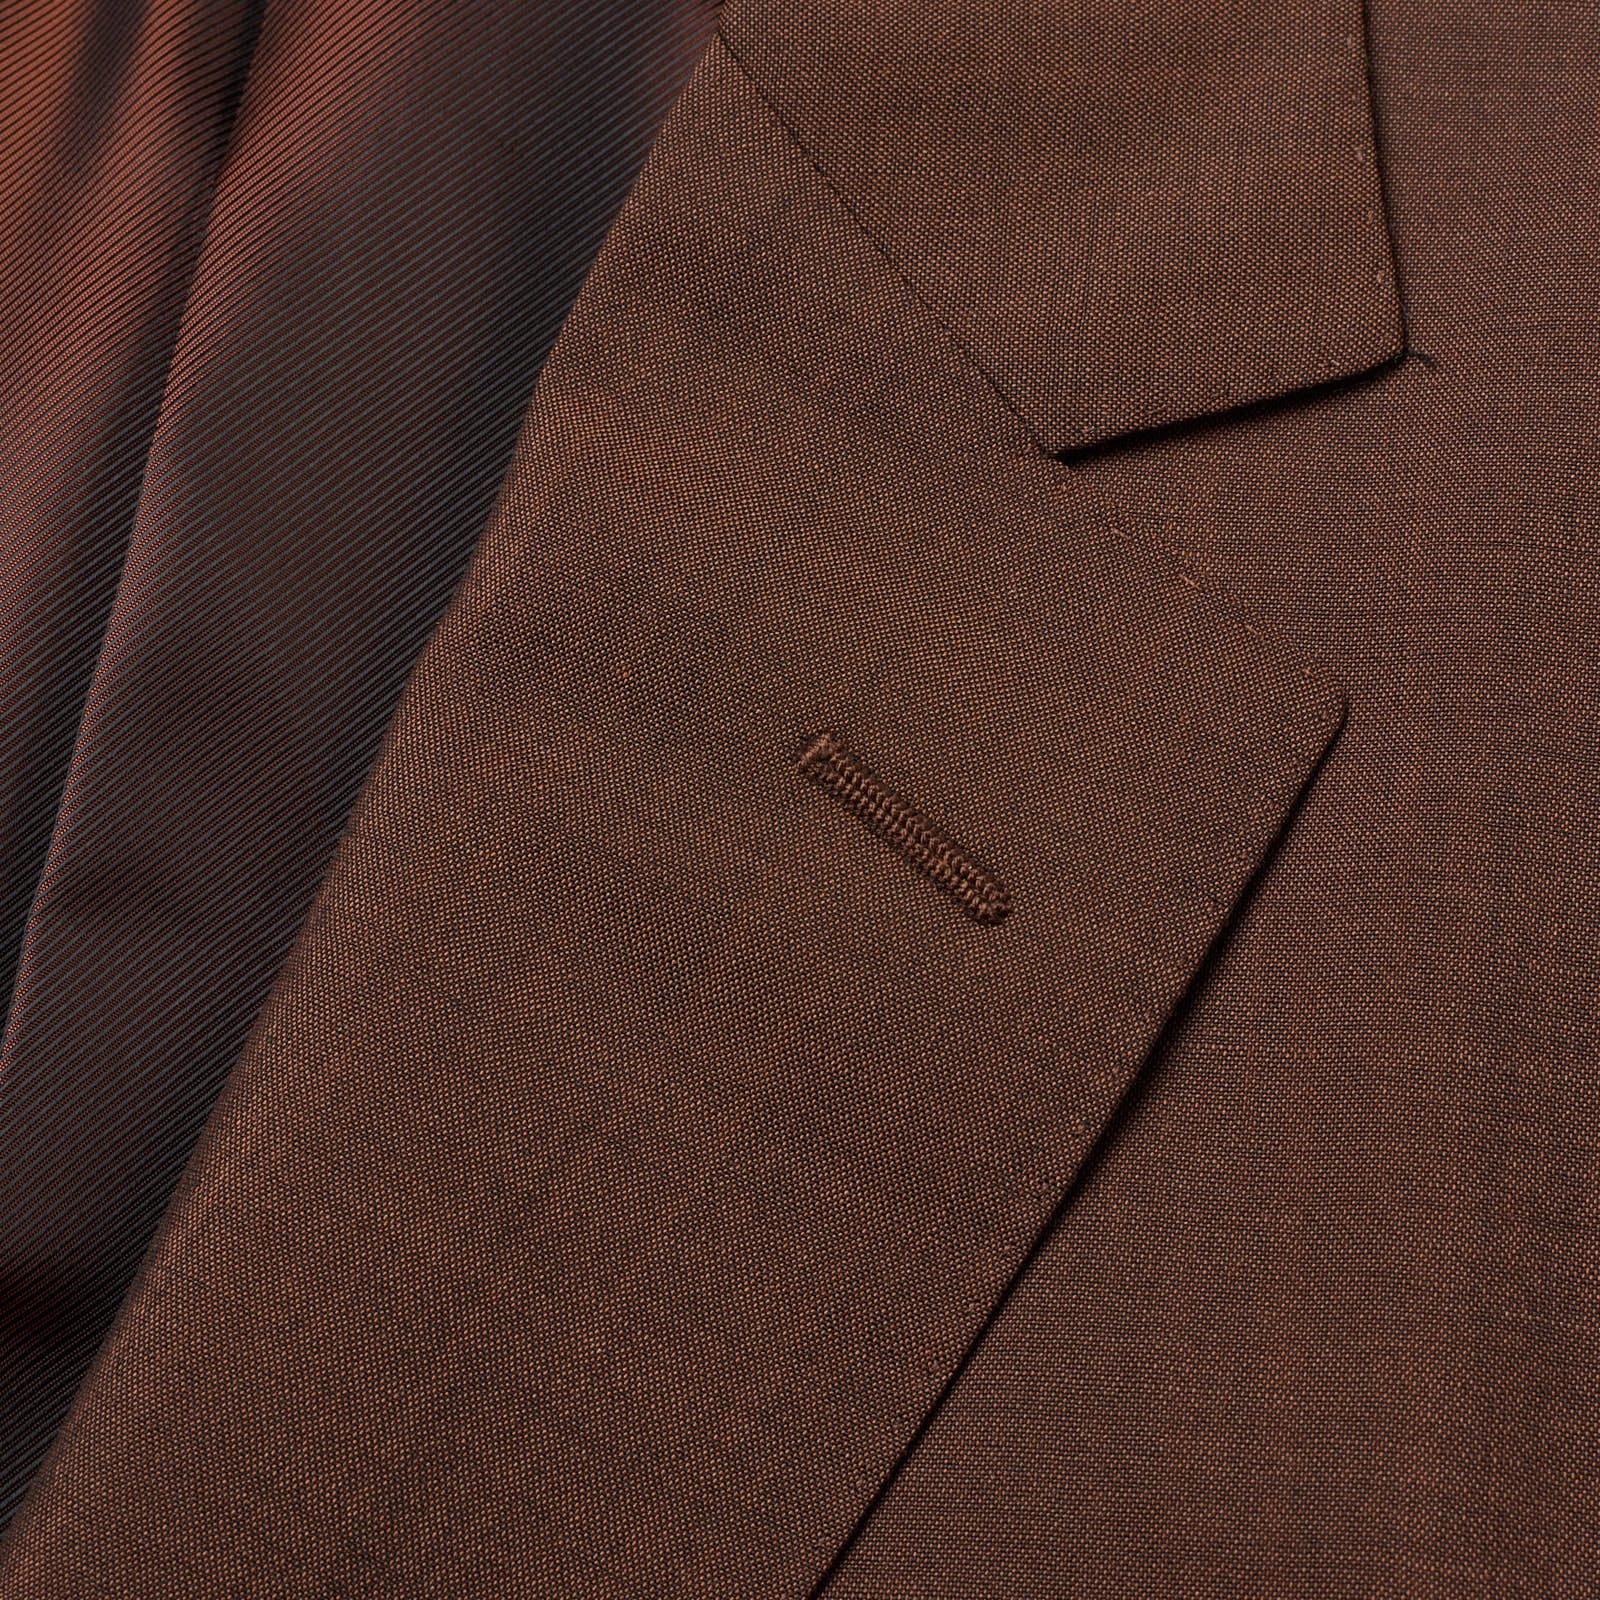 PAL ZILERI Brown Wool-Mohair Suit EU 54 NEW US 44 "180 Stages" 40 Year Anniversary